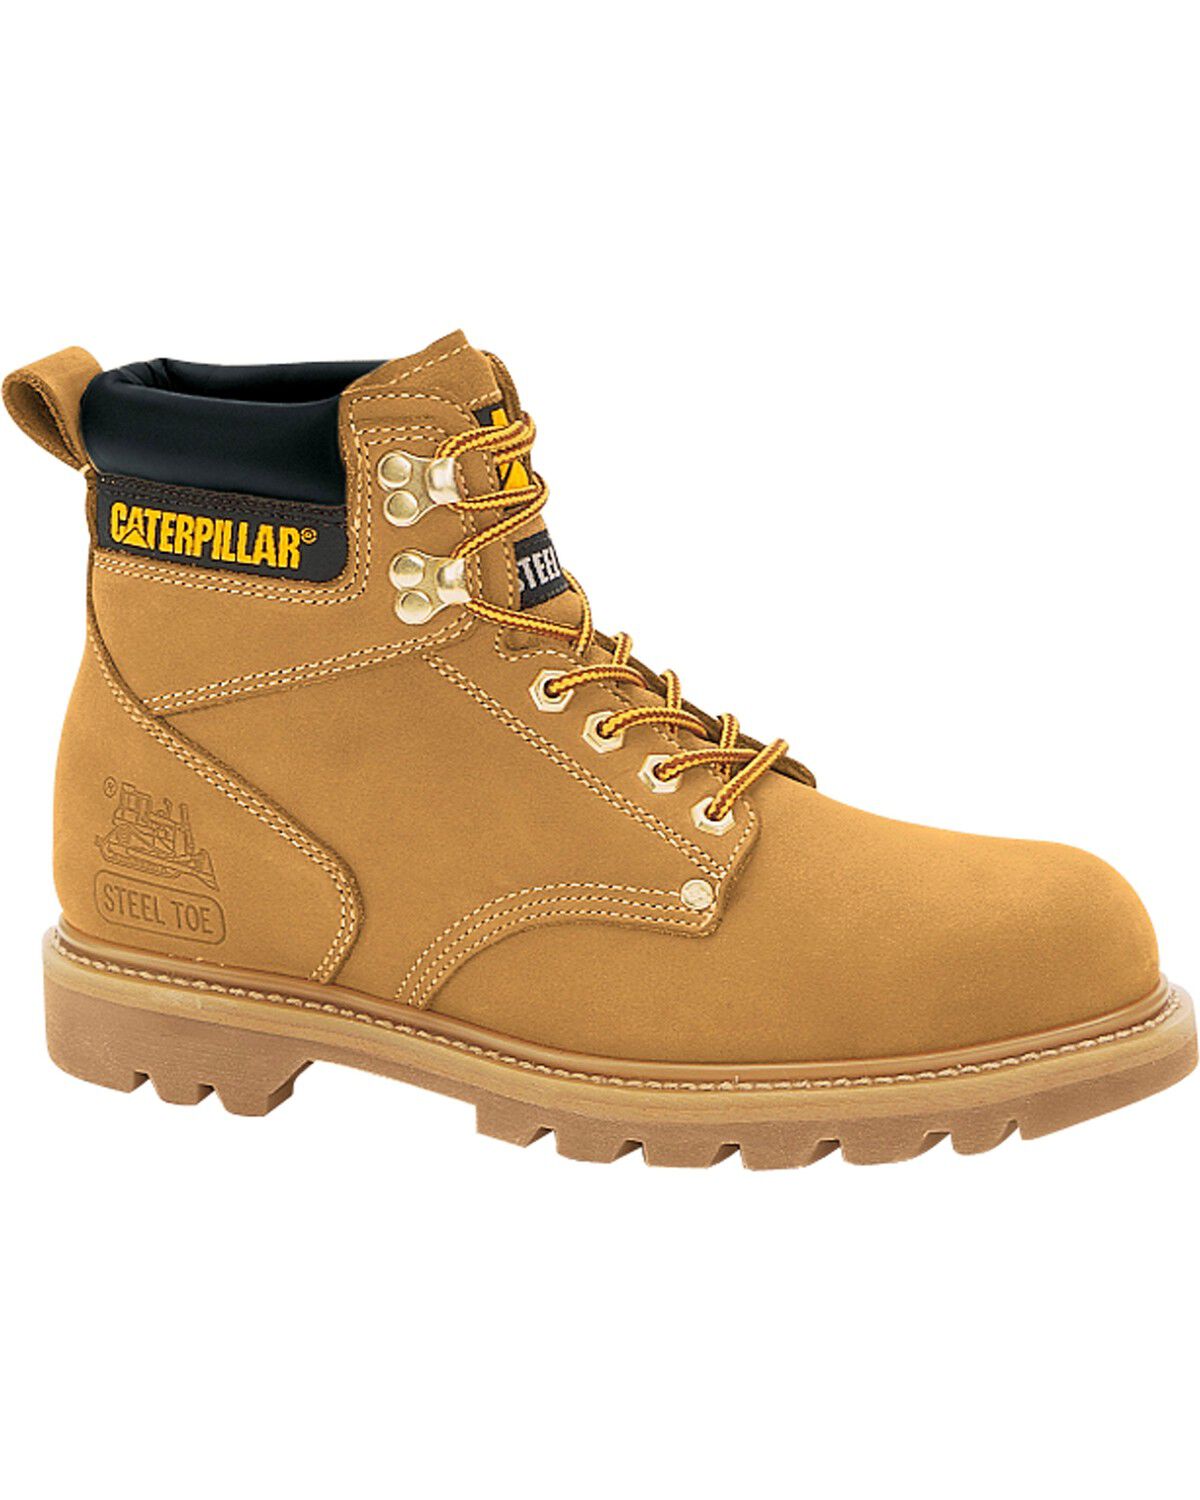 caterpillar shoes on sale